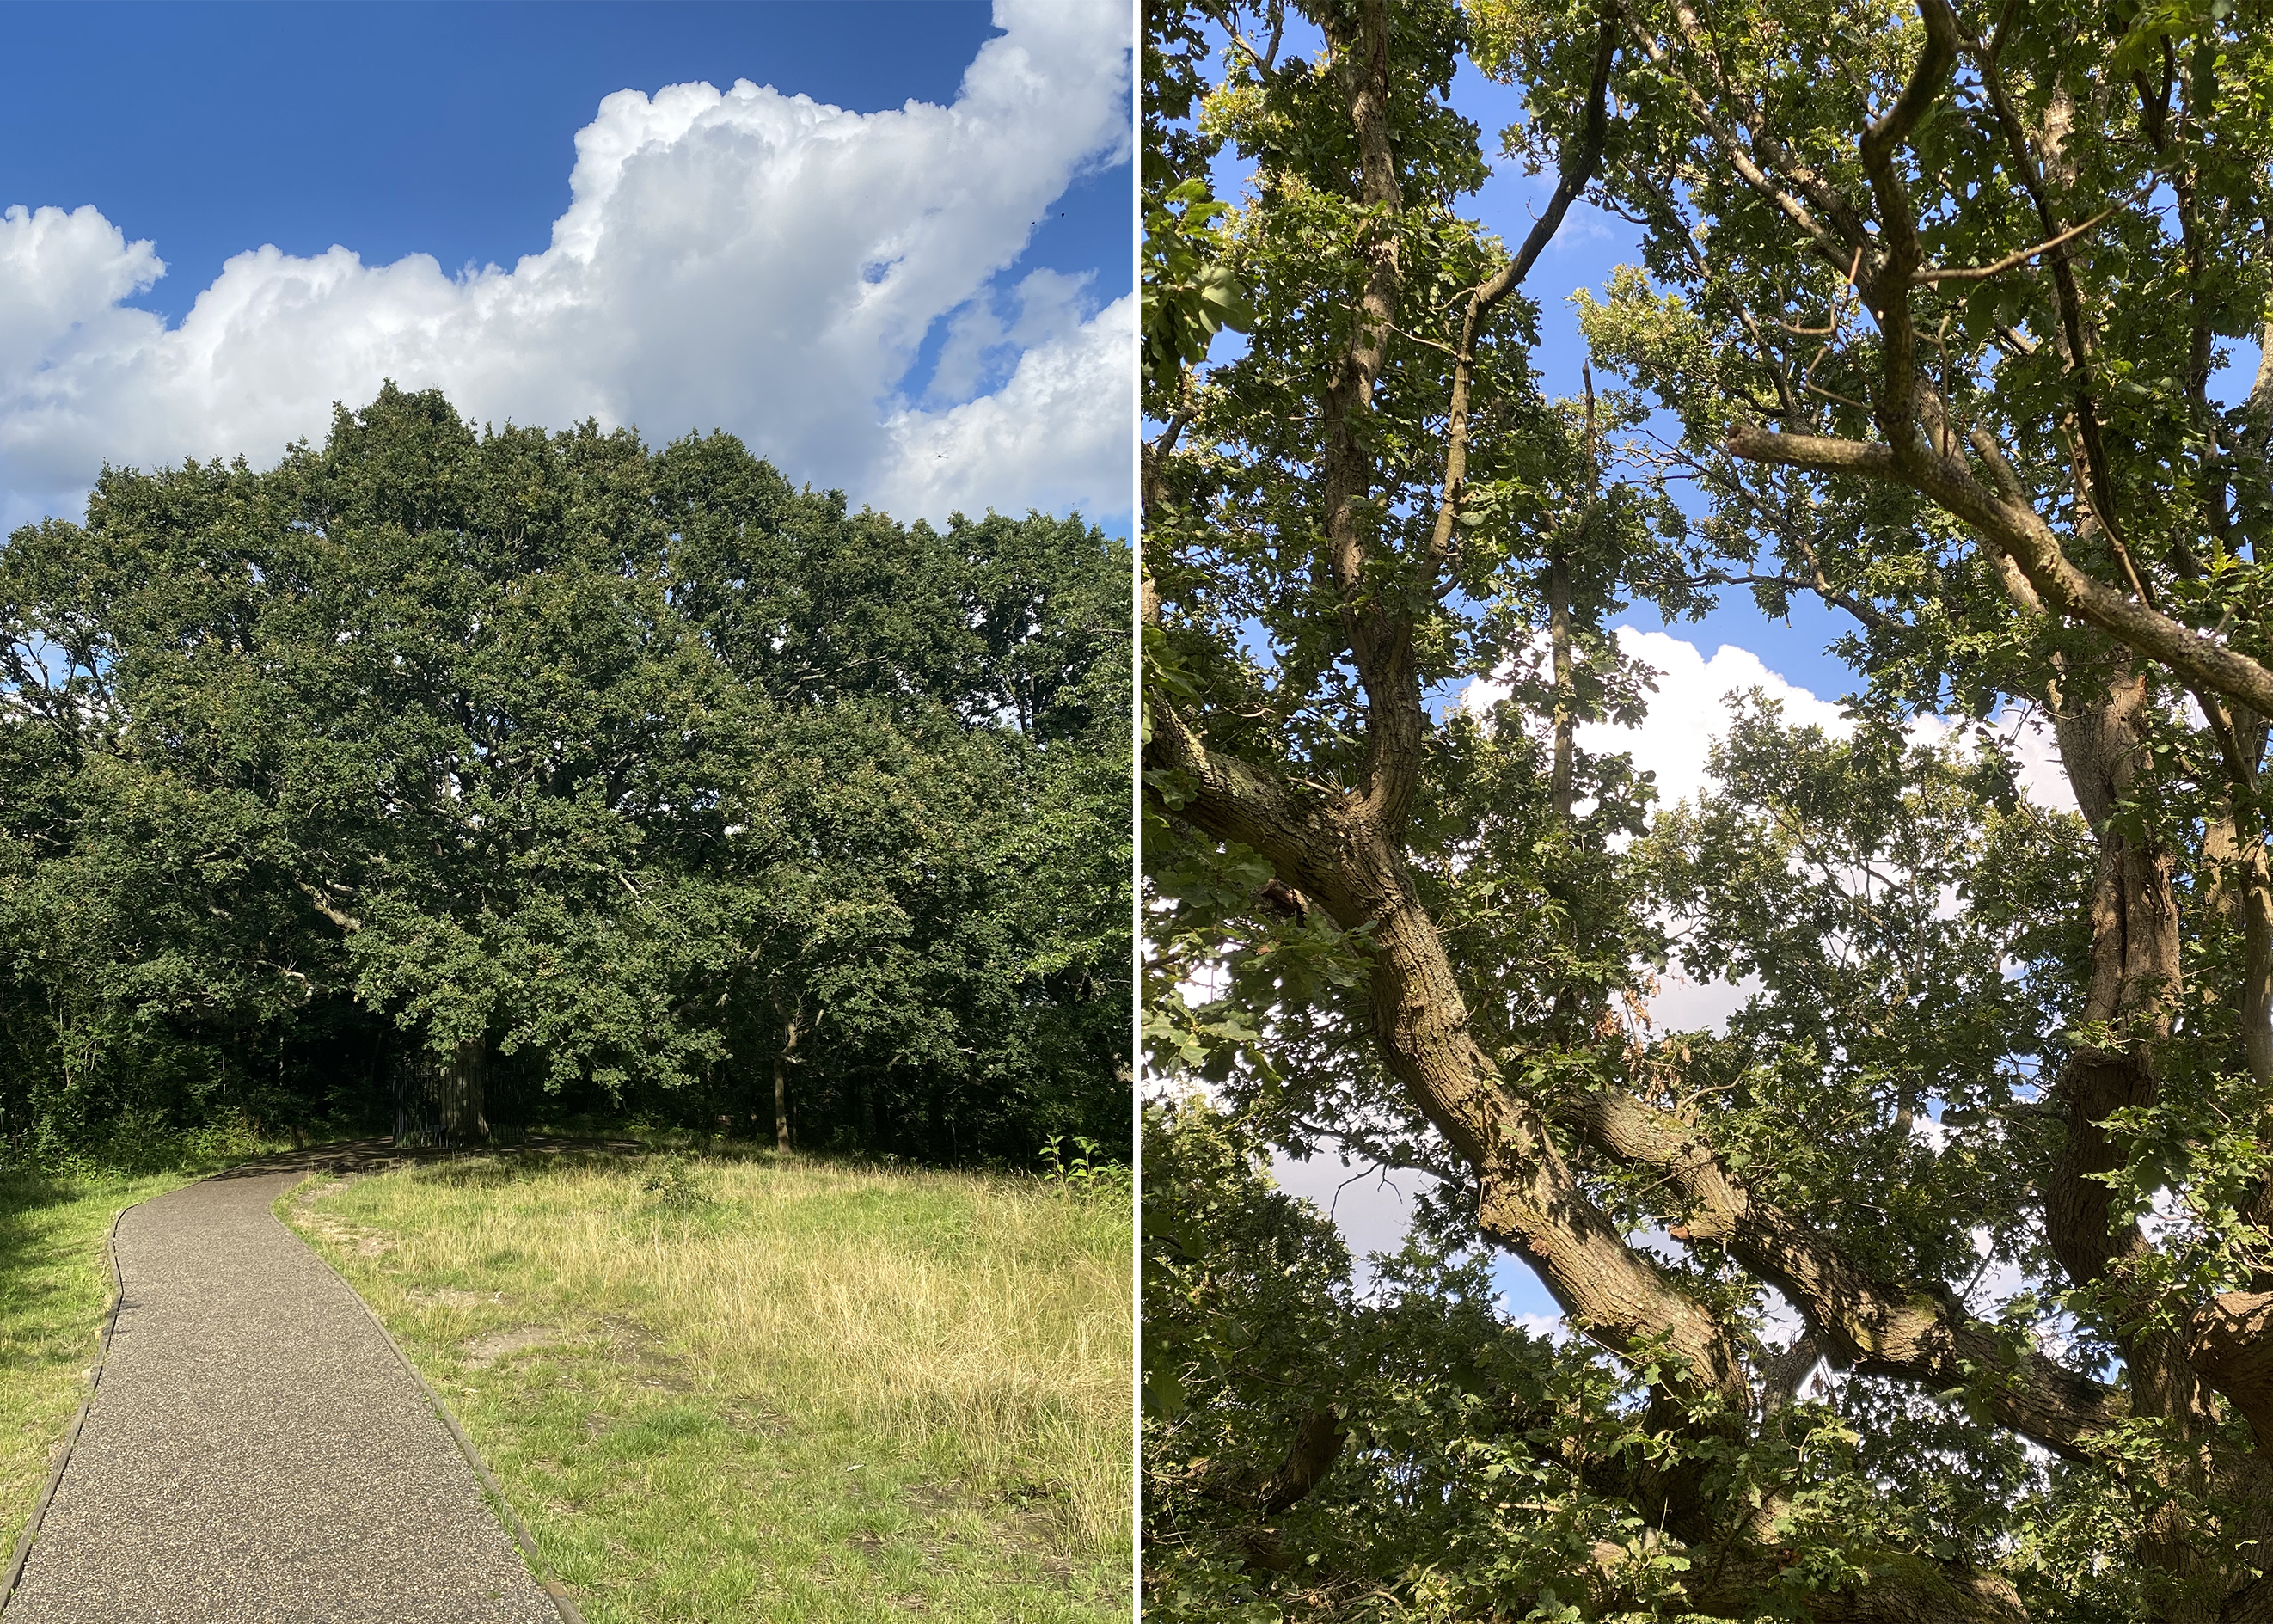 Two photos of the tree side by side, one zoomed out with a full mature canopy, and one closer up of a few branches with blue sky in the background.